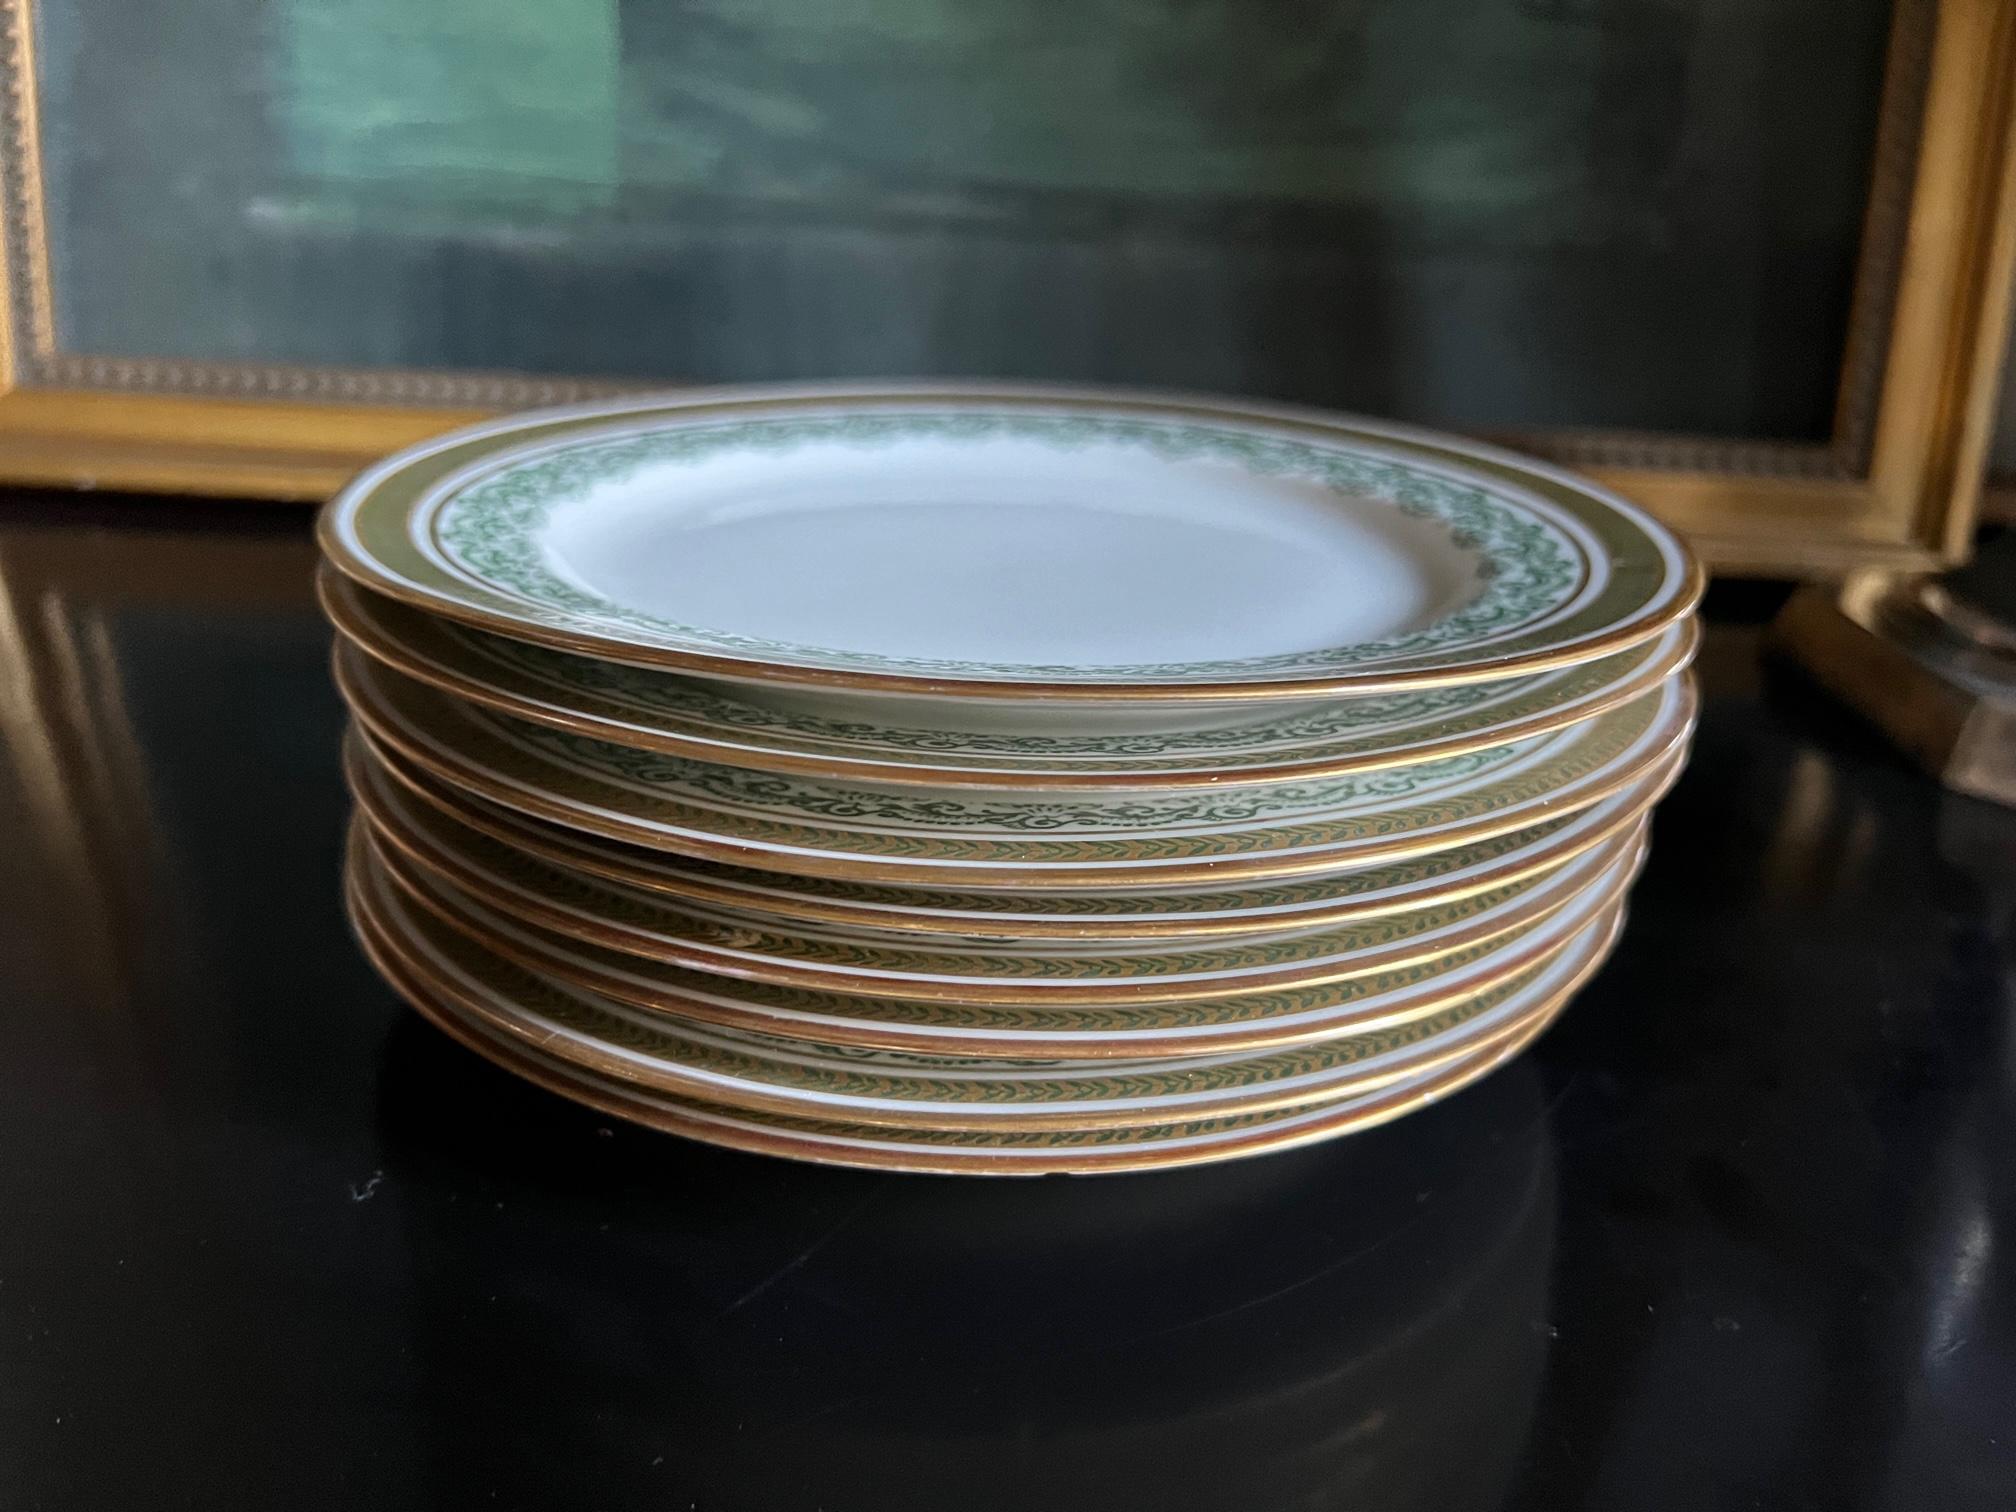 Set of eight Limoges salad / dessert plates made in France by Jean Pouyat between 1890 and 1902. The plates are a bright white with green scrolling around the inside edge with green laurel on a gold band on the outer rim.

The stamp on each plate